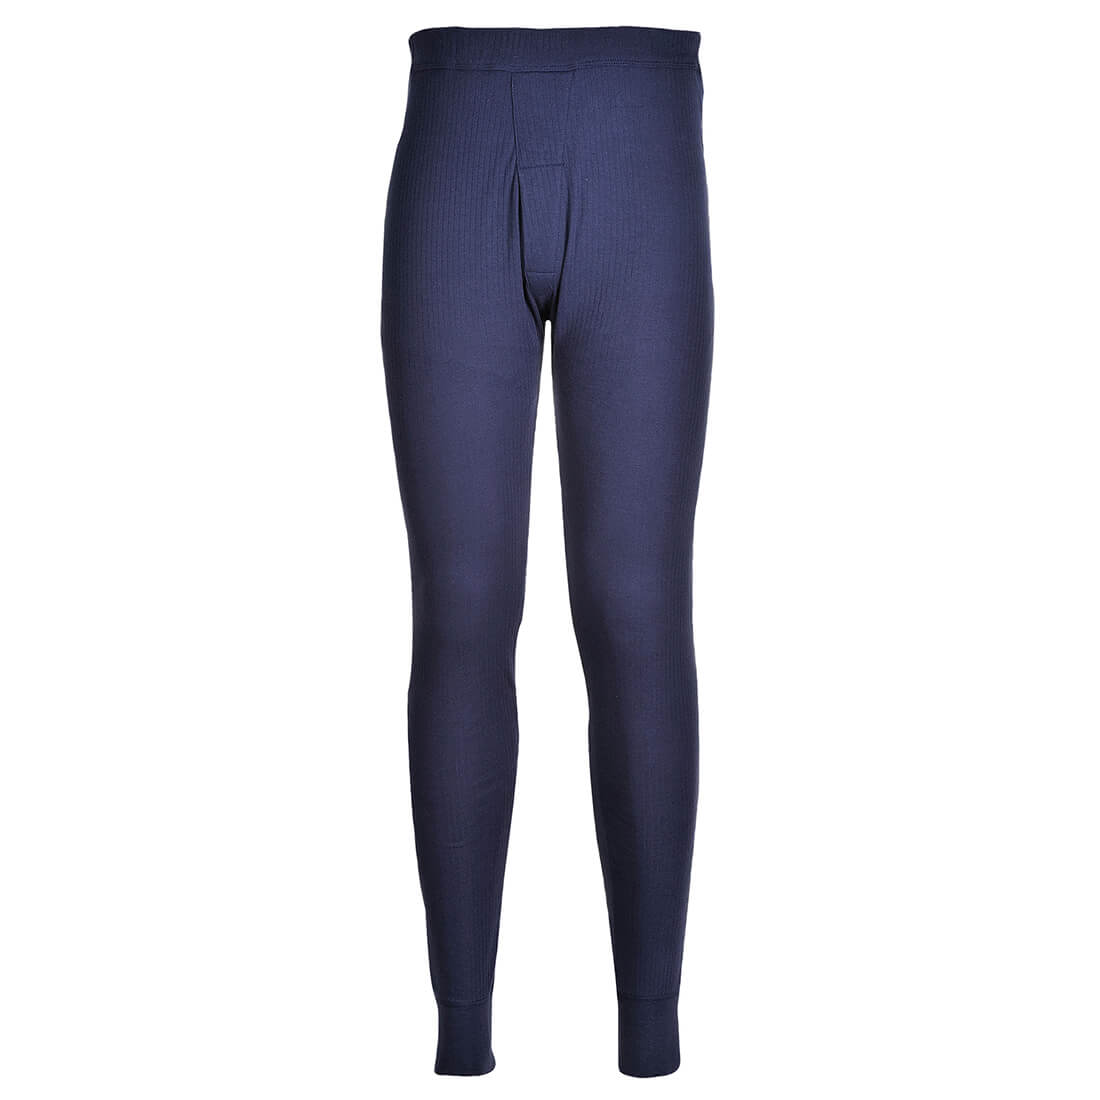 Image of Portwest Thermal Trousers Navy 4XL